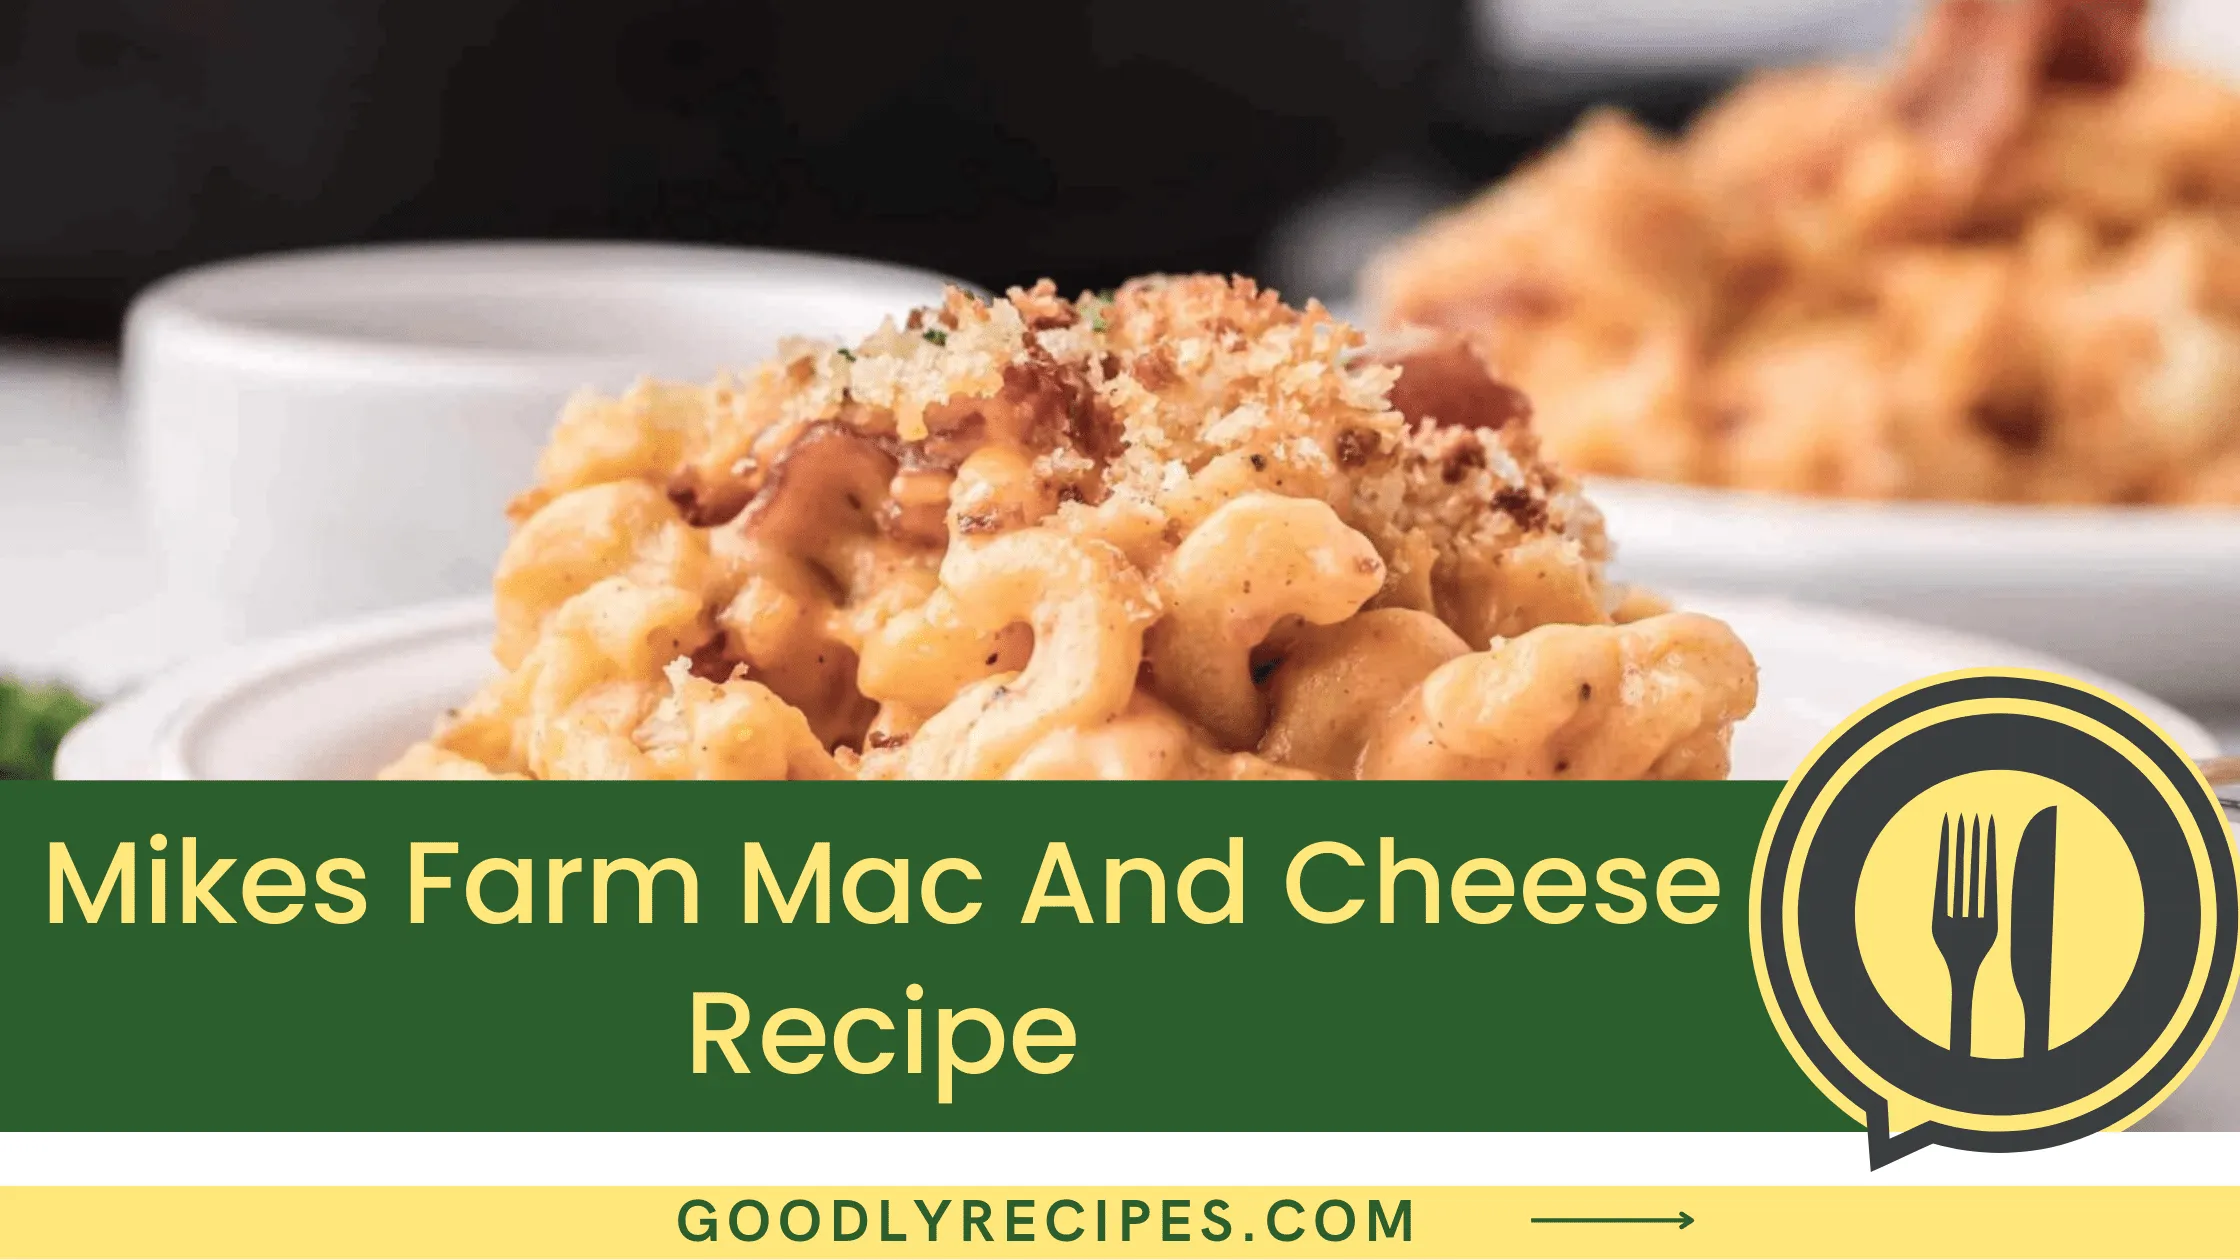 What Is Mike's Farm Mac And Cheese Rice?